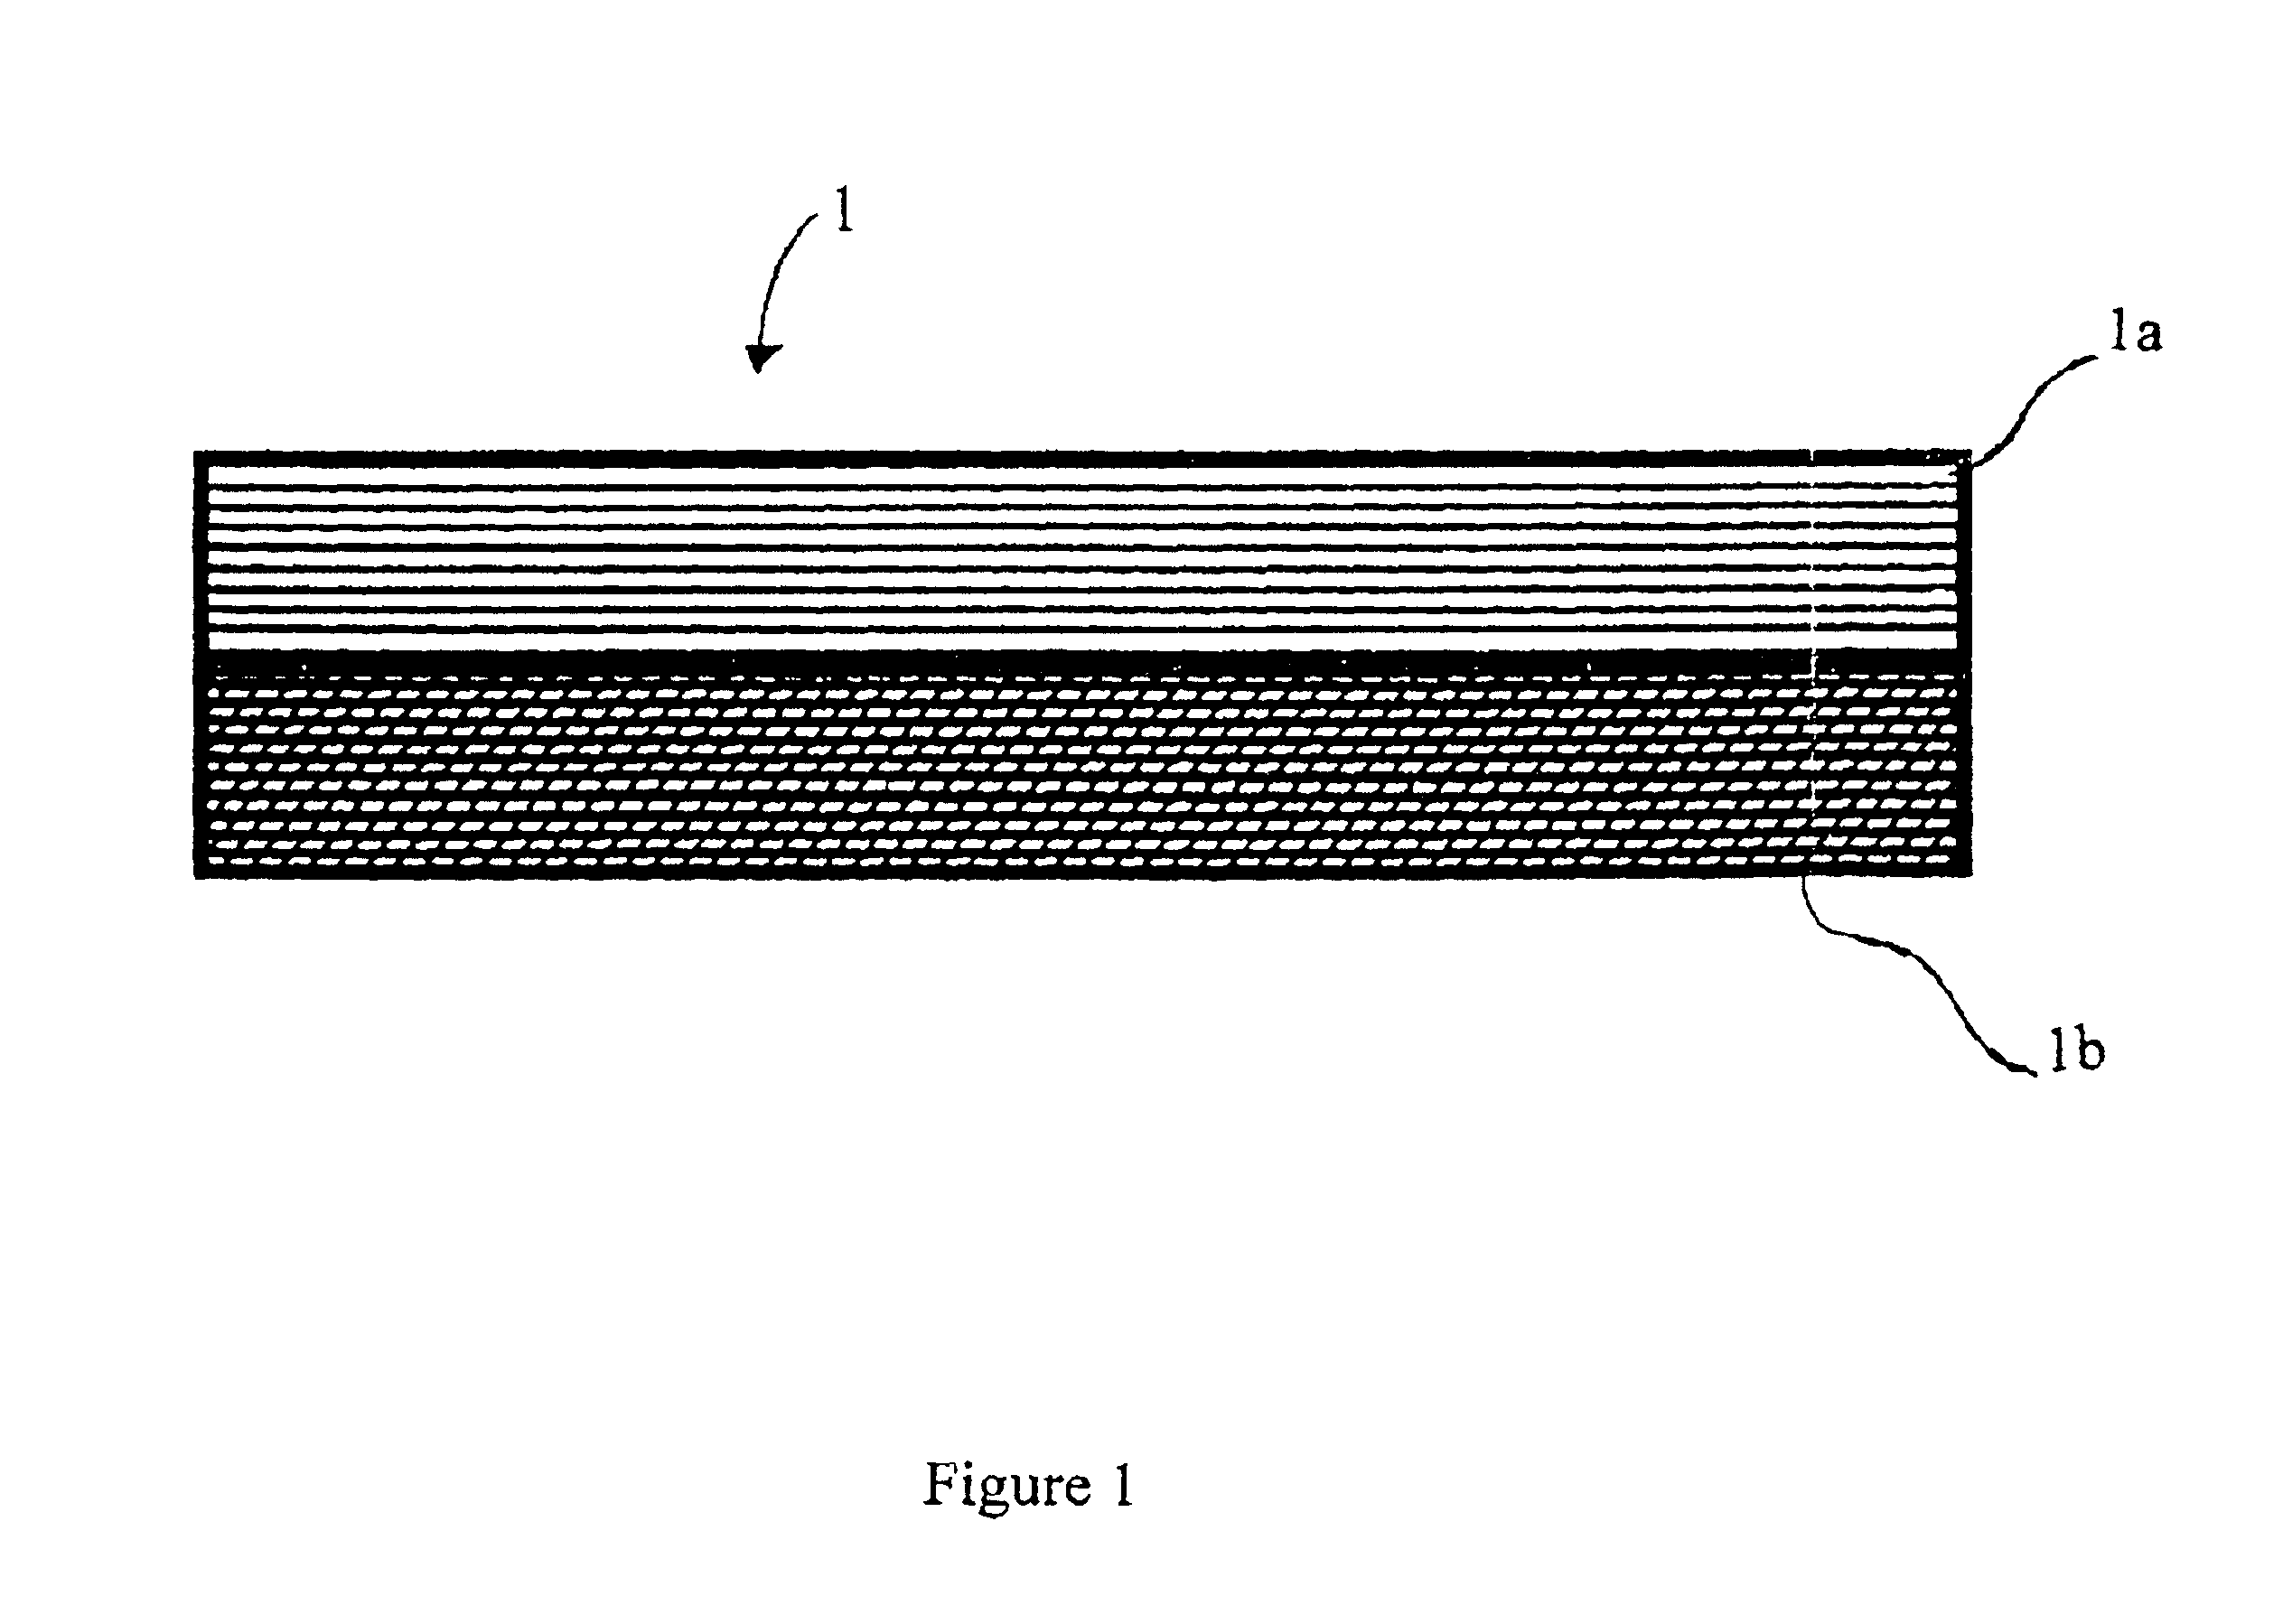 Multilayered polymeric structure